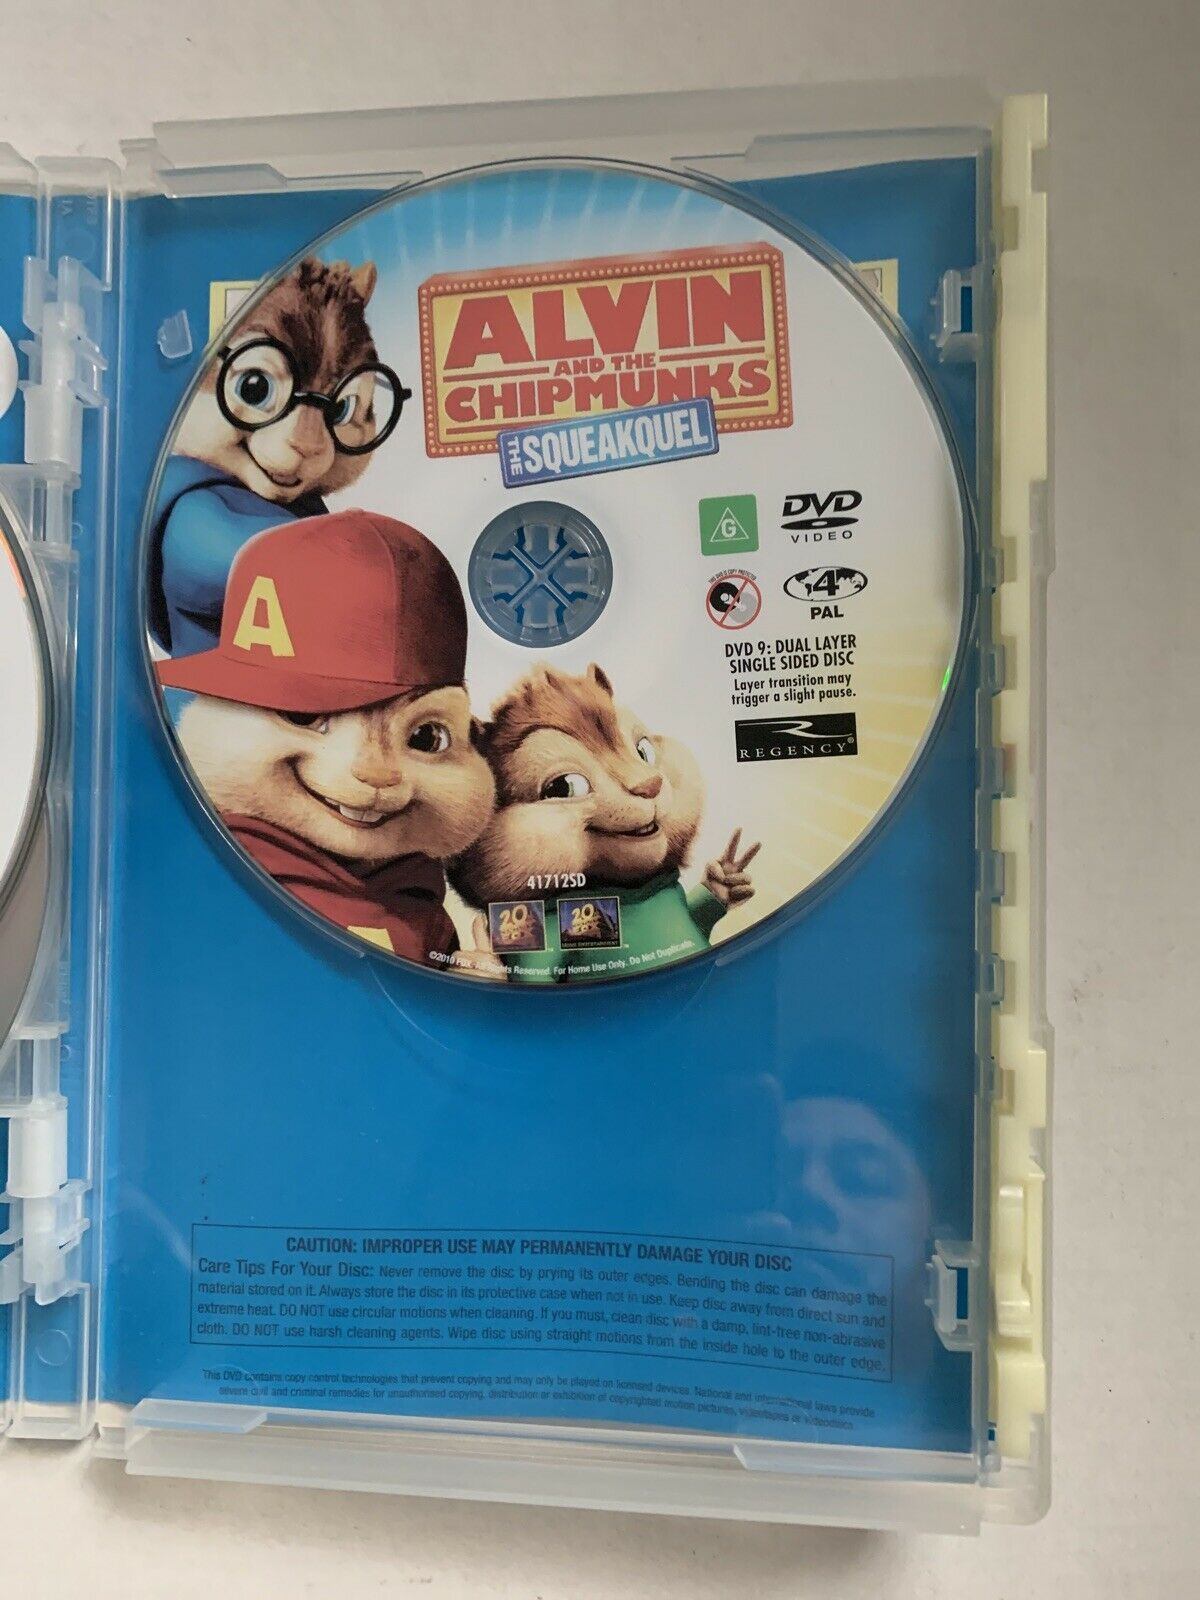 5 Movie DVDs: Ice Age 1&2, Alvin The Chipmunks & The Squeakquel, The Simpsons